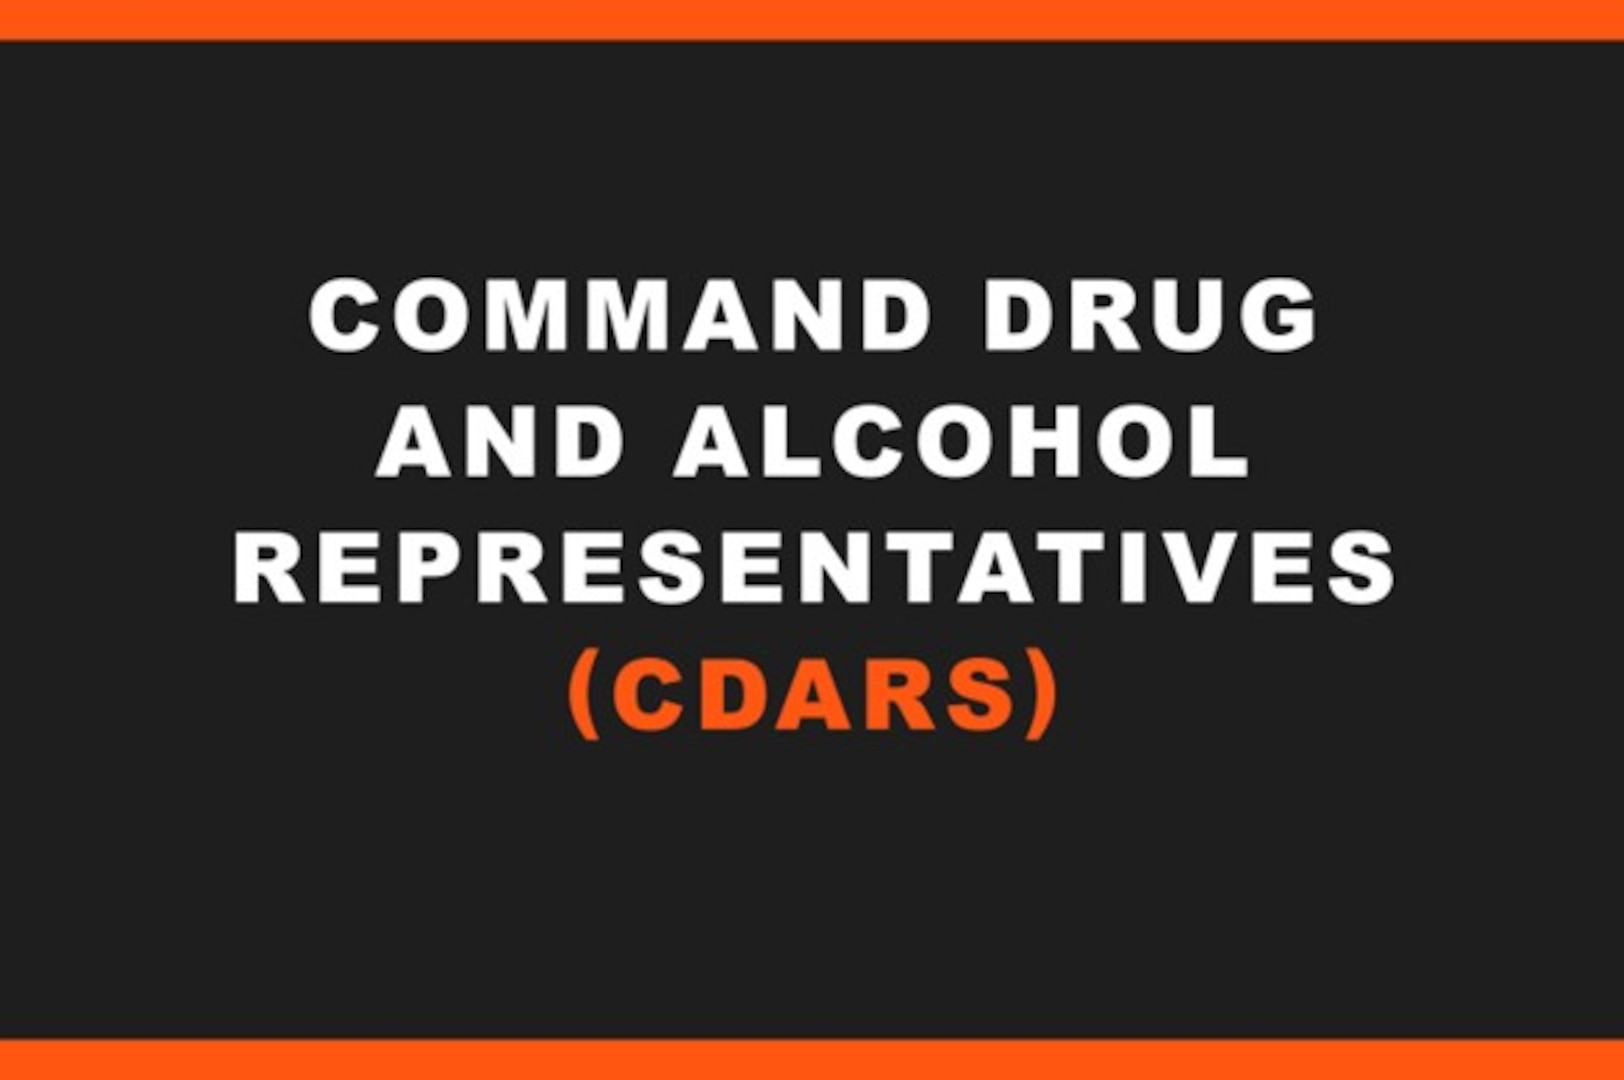 As the “backbone” of our prevention efforts, CDARs conduct yearly prevention training, provide administrative support for screening, assessment, and referral to care.